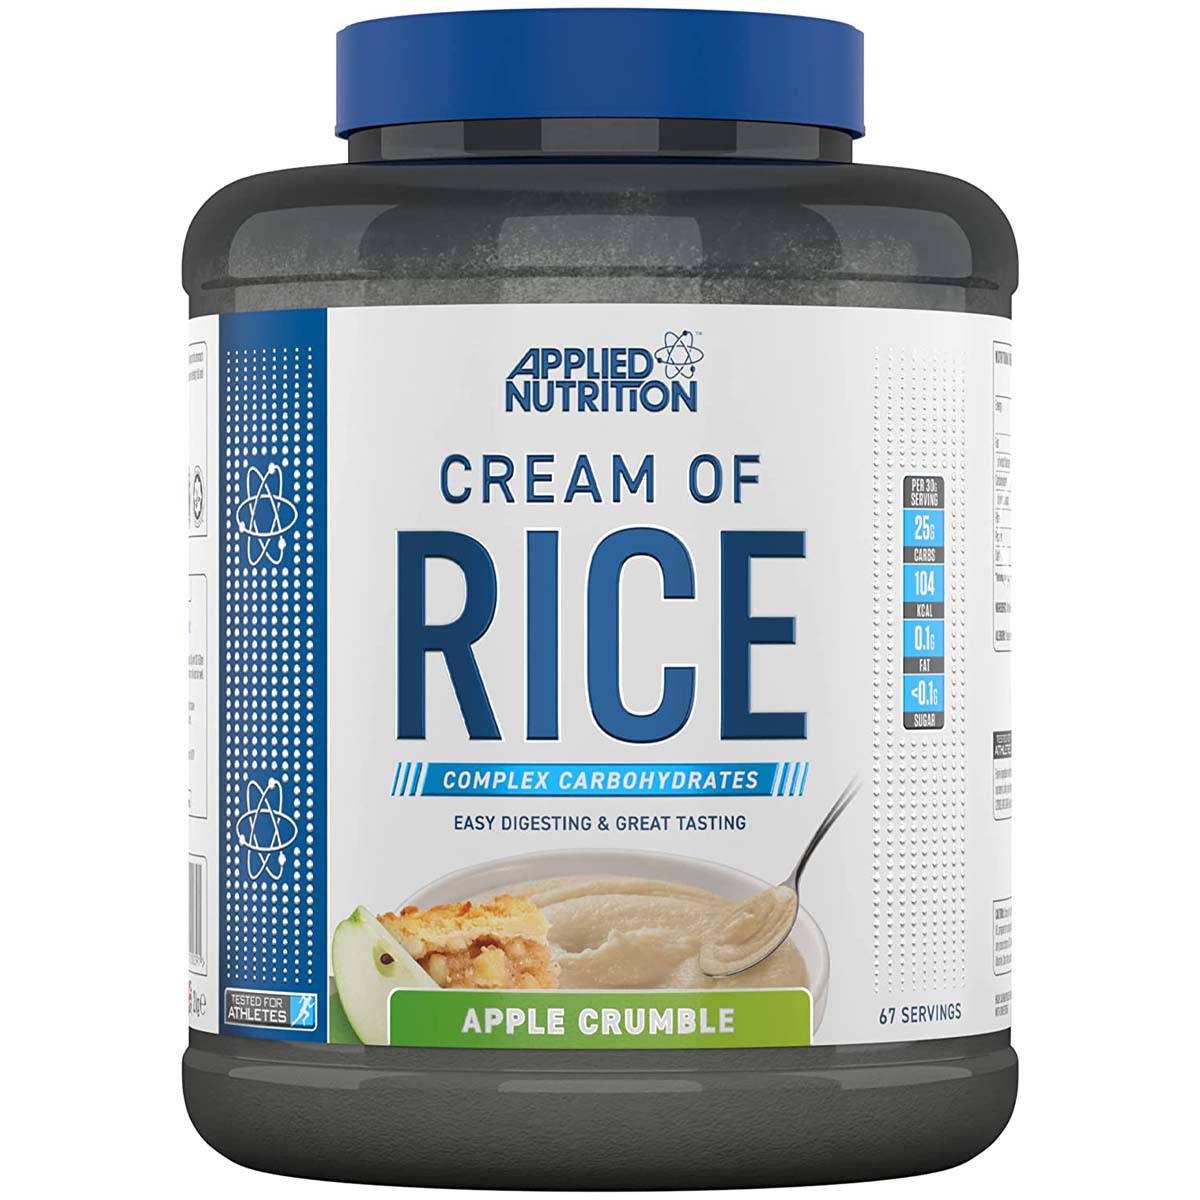 Applied Nutrition Cream of Rice 2 KG Apple Crumble